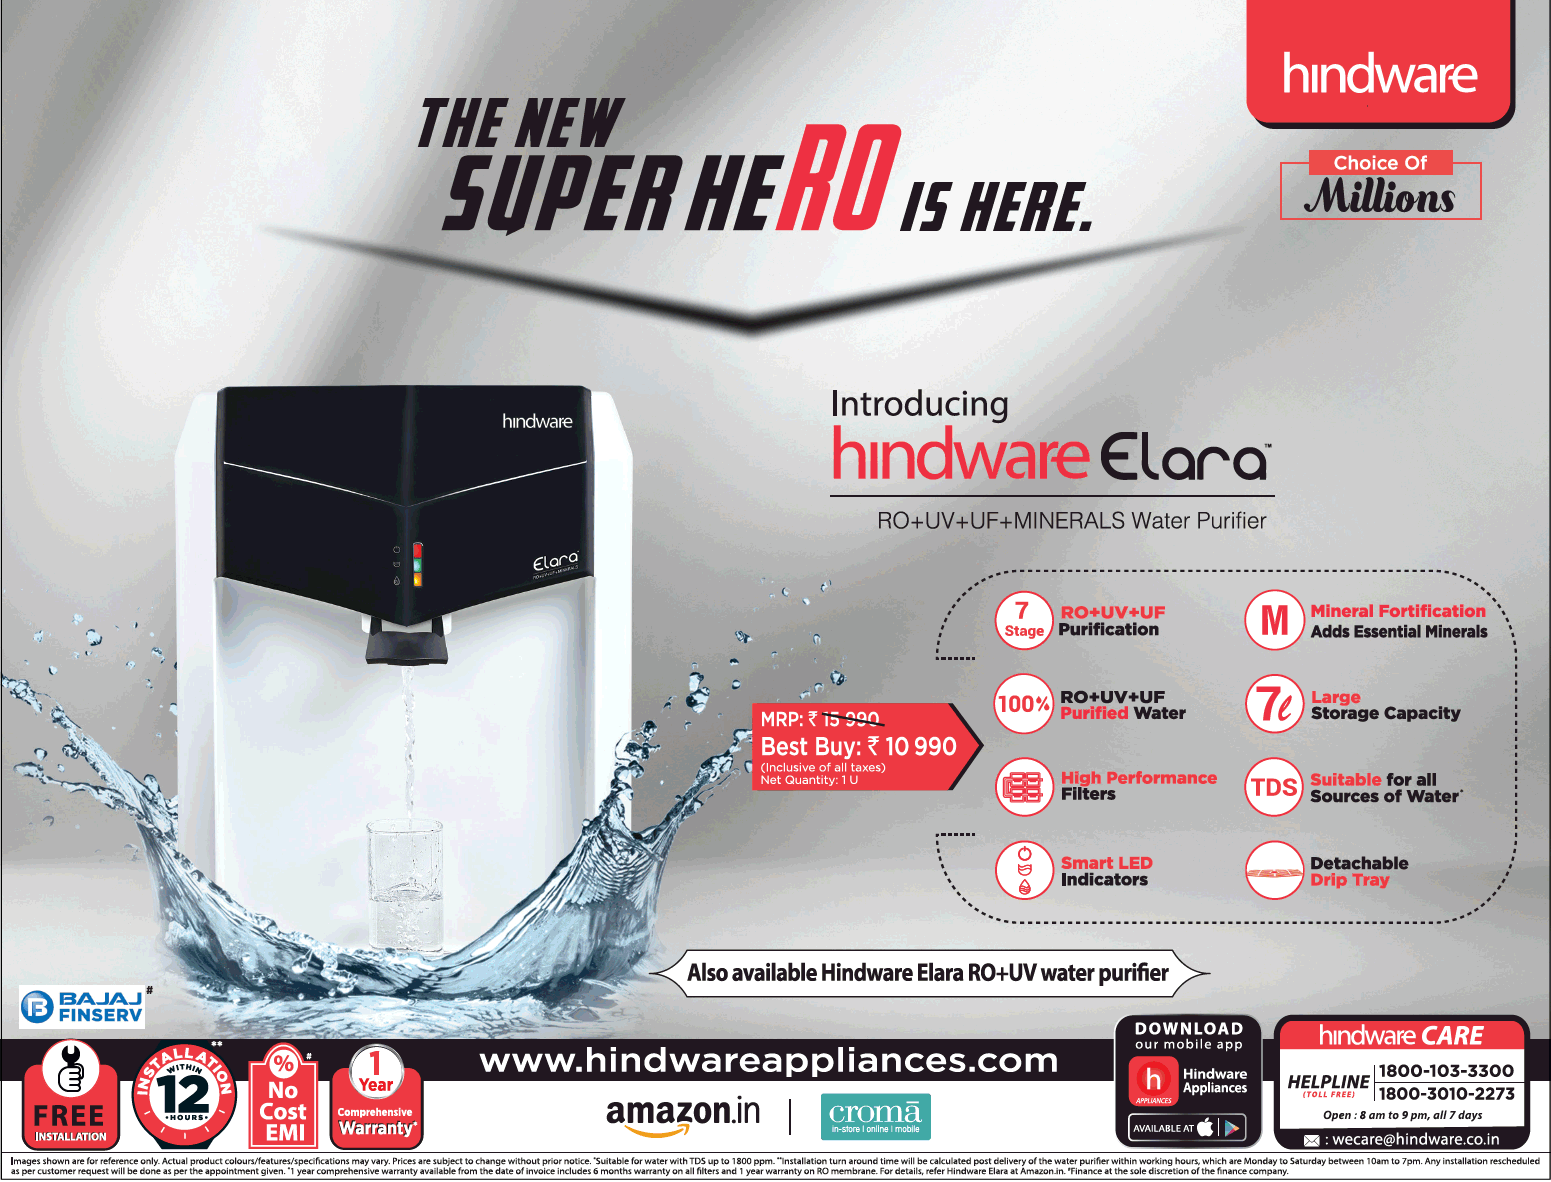 hindware-choice-of-millions-the-super-hero-if-here-ad-times-of-india-delhi-06-07-2019.png